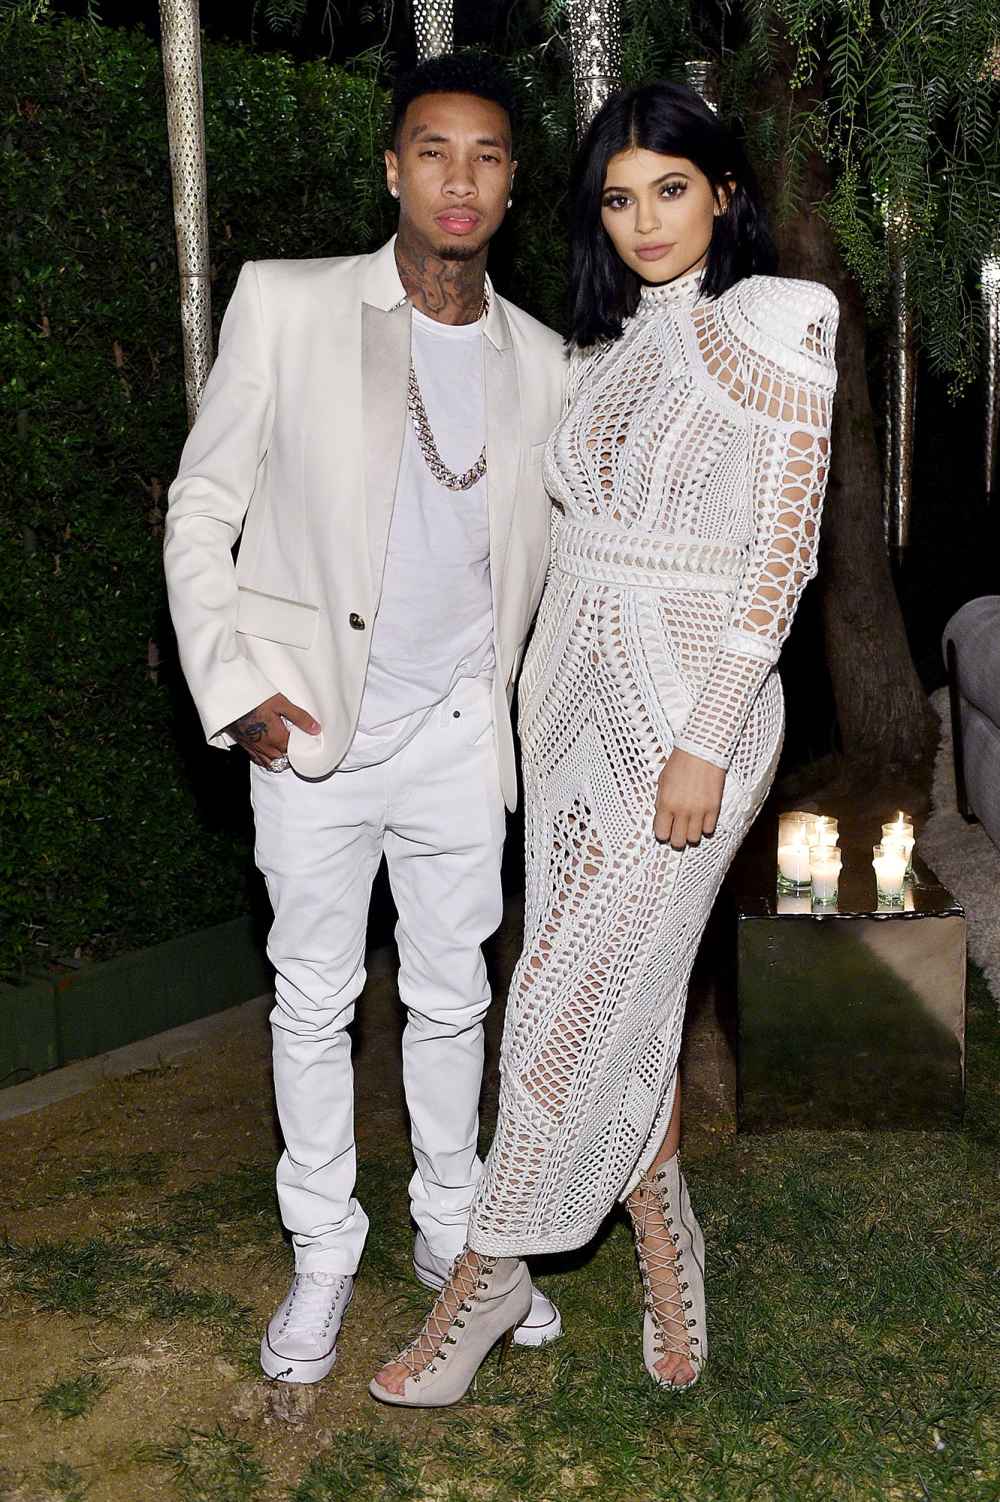 Tyga and Kylie Jenner Dressed In All White